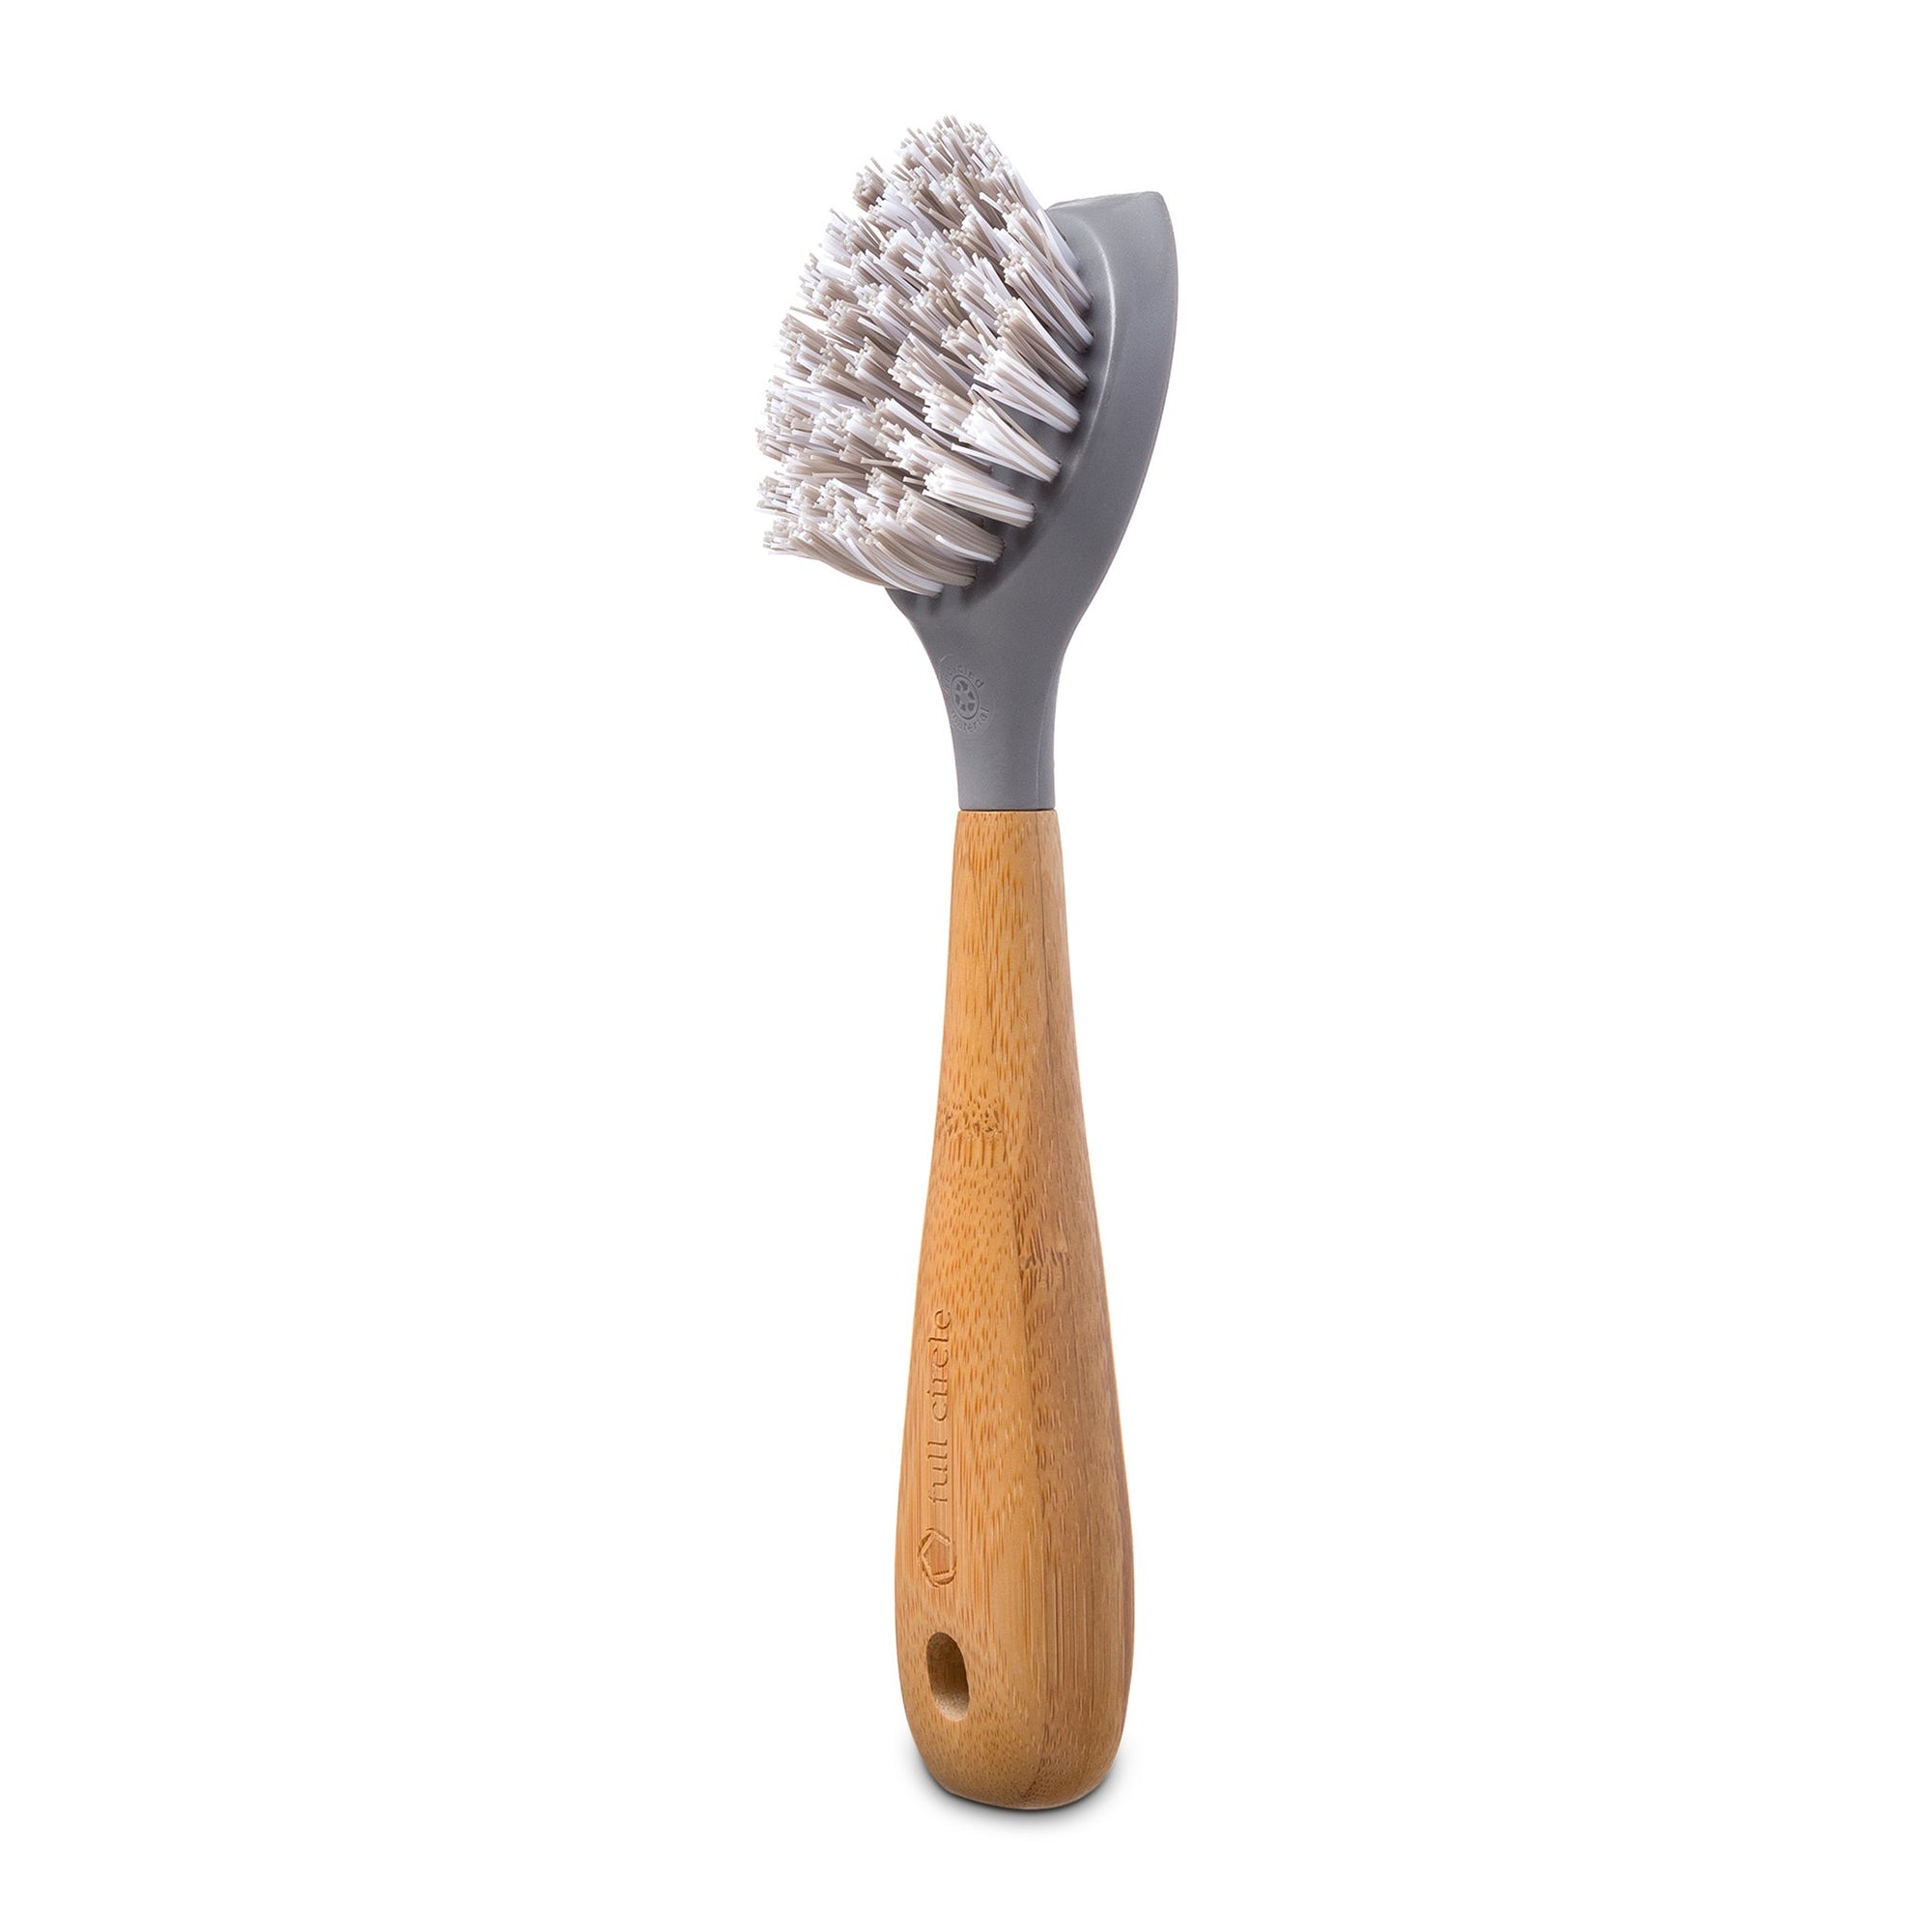 Best Cast Iron Cleaner: Lodge Cast Iron Scrub Brush Review